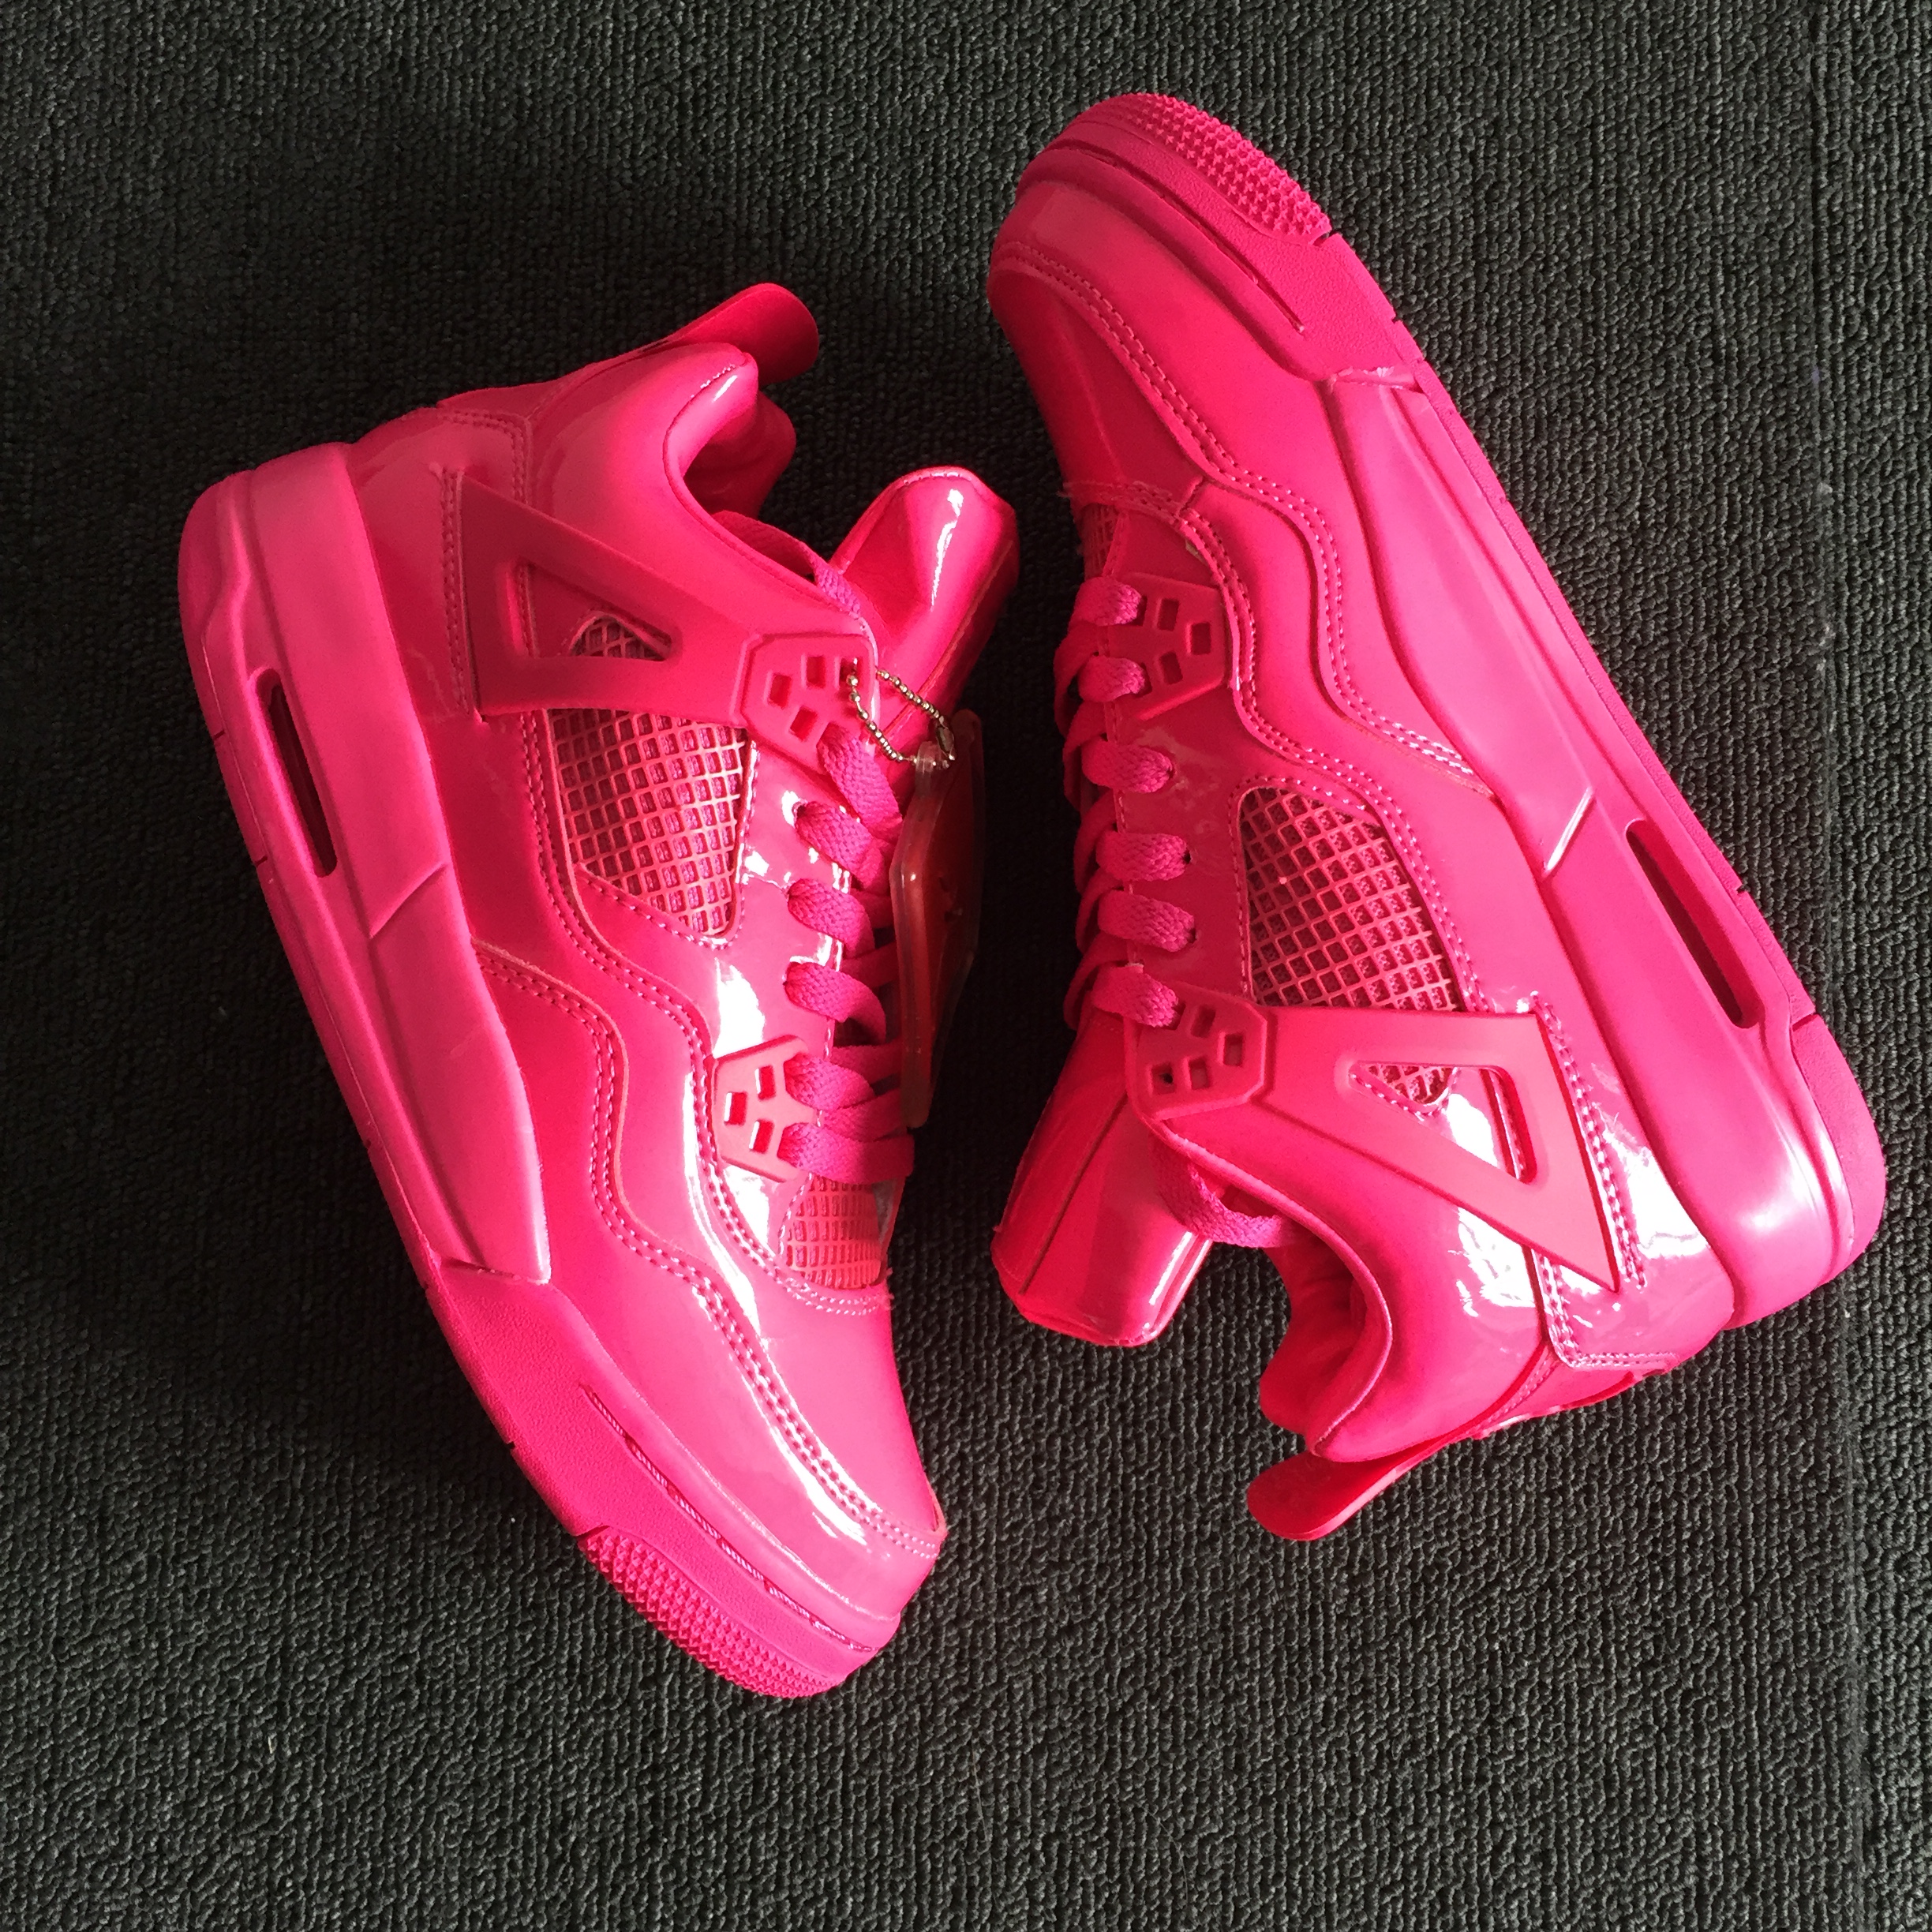 Women Air Jordan 4 Valentine's Day Red Shoes